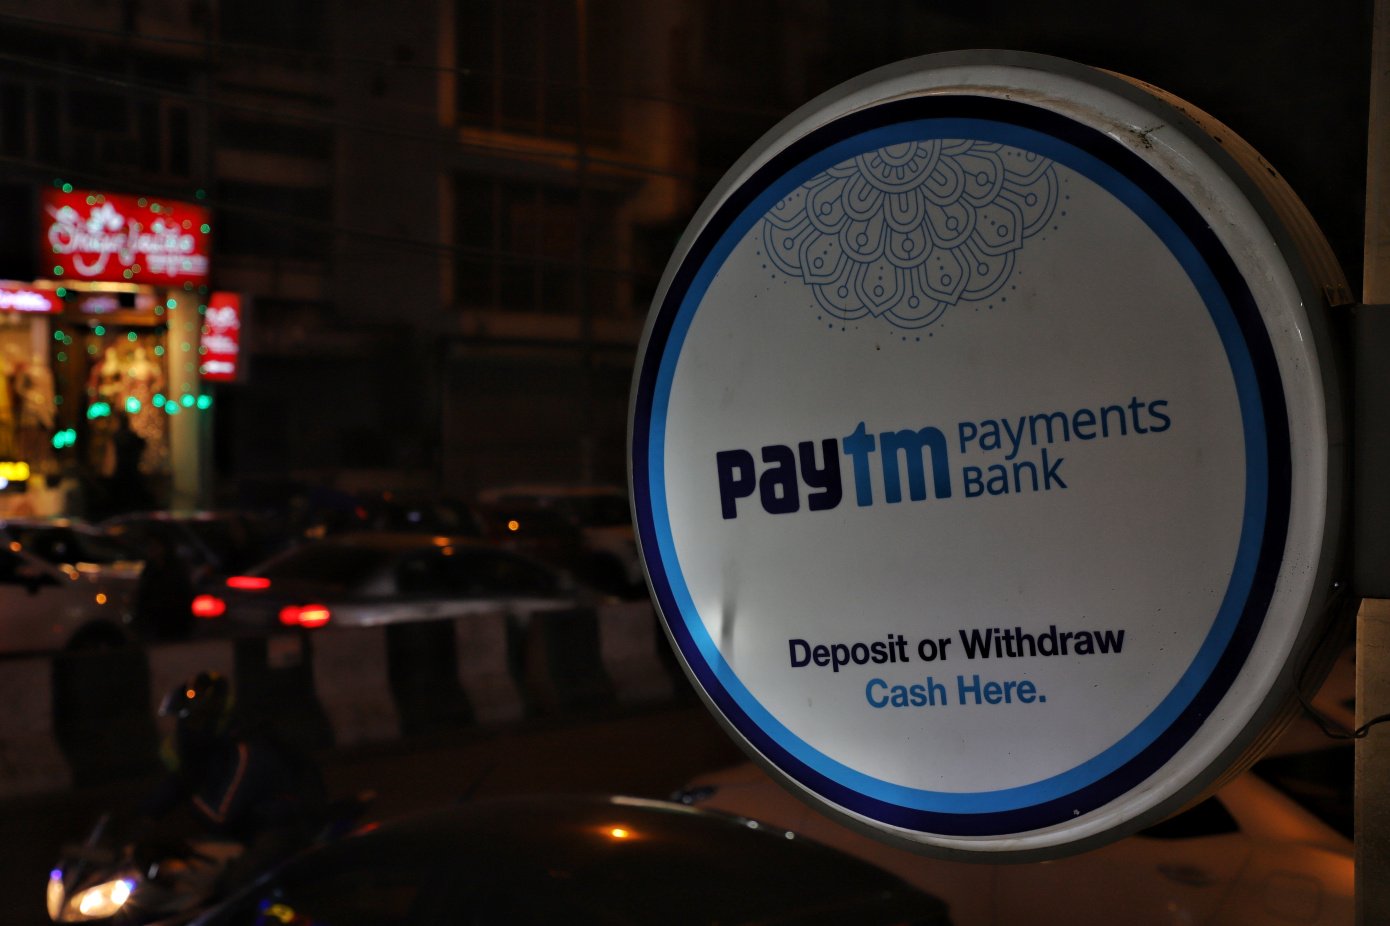 Paytm Payments Bank board is installed outside a branch in New Delhi india on 08 December 2019 (Photo by Nasir Kachroo/NurPhoto via Getty Images)